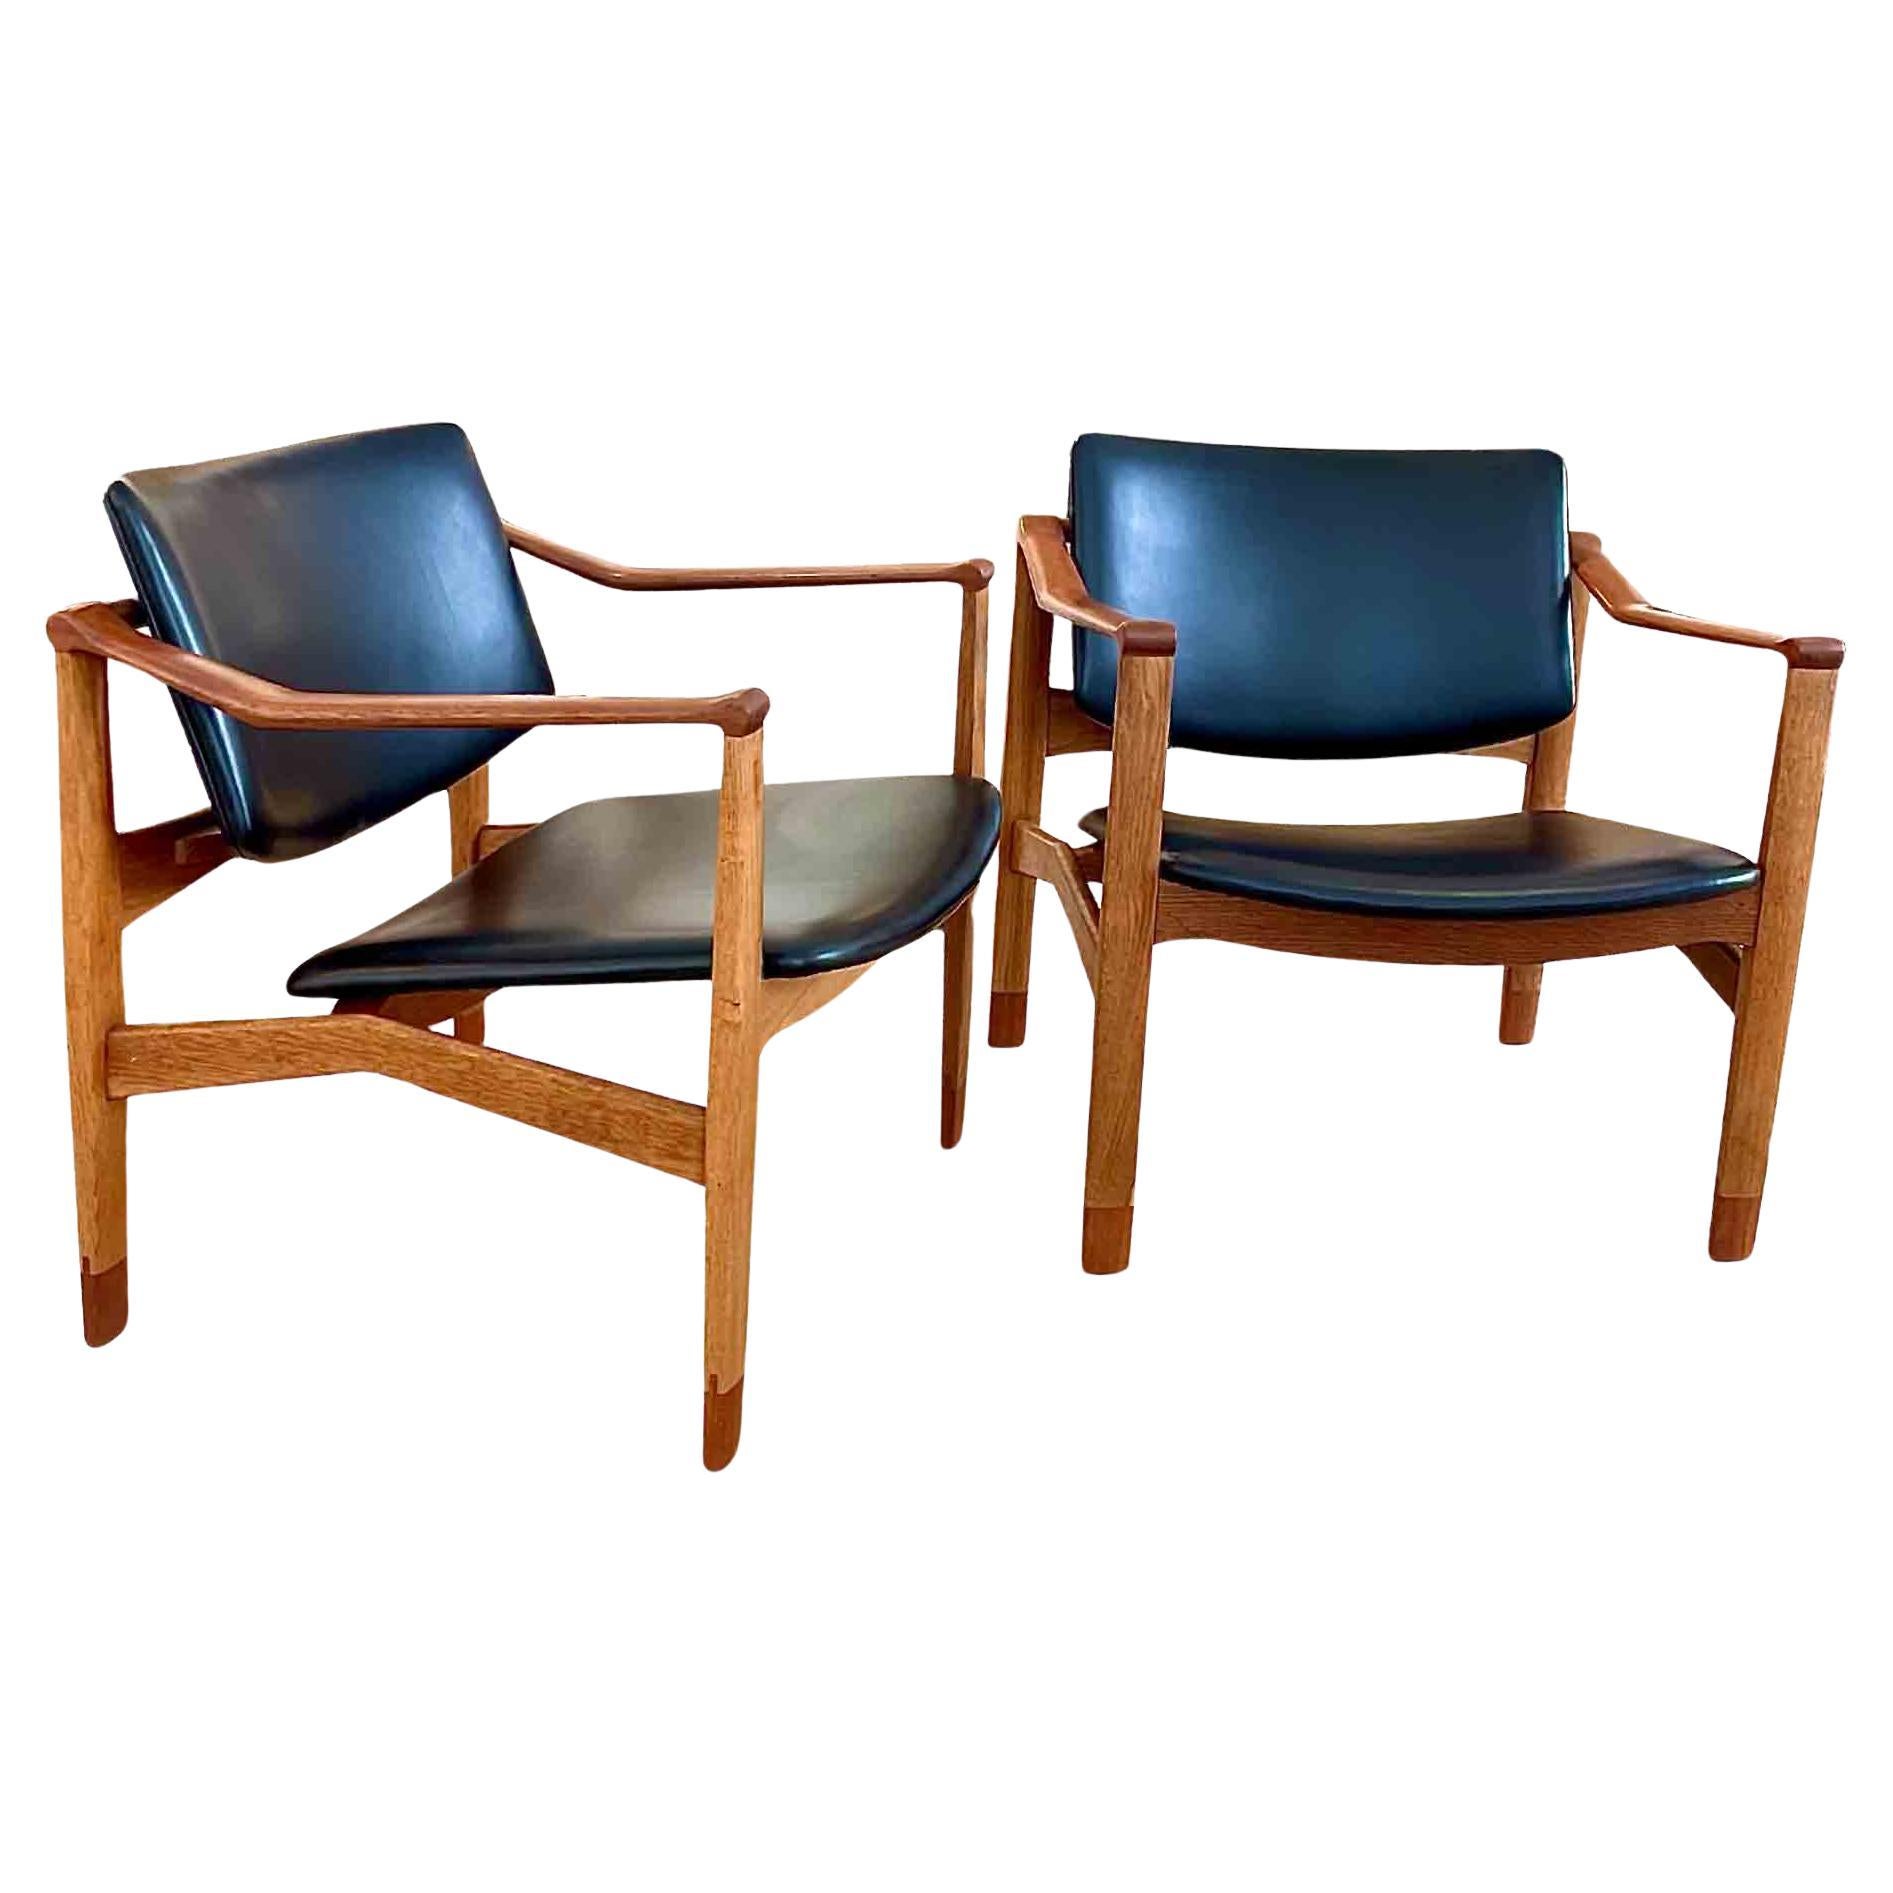 Pair of Rare Vintage Launge Chairs by William Watting, design 1950's For Sale